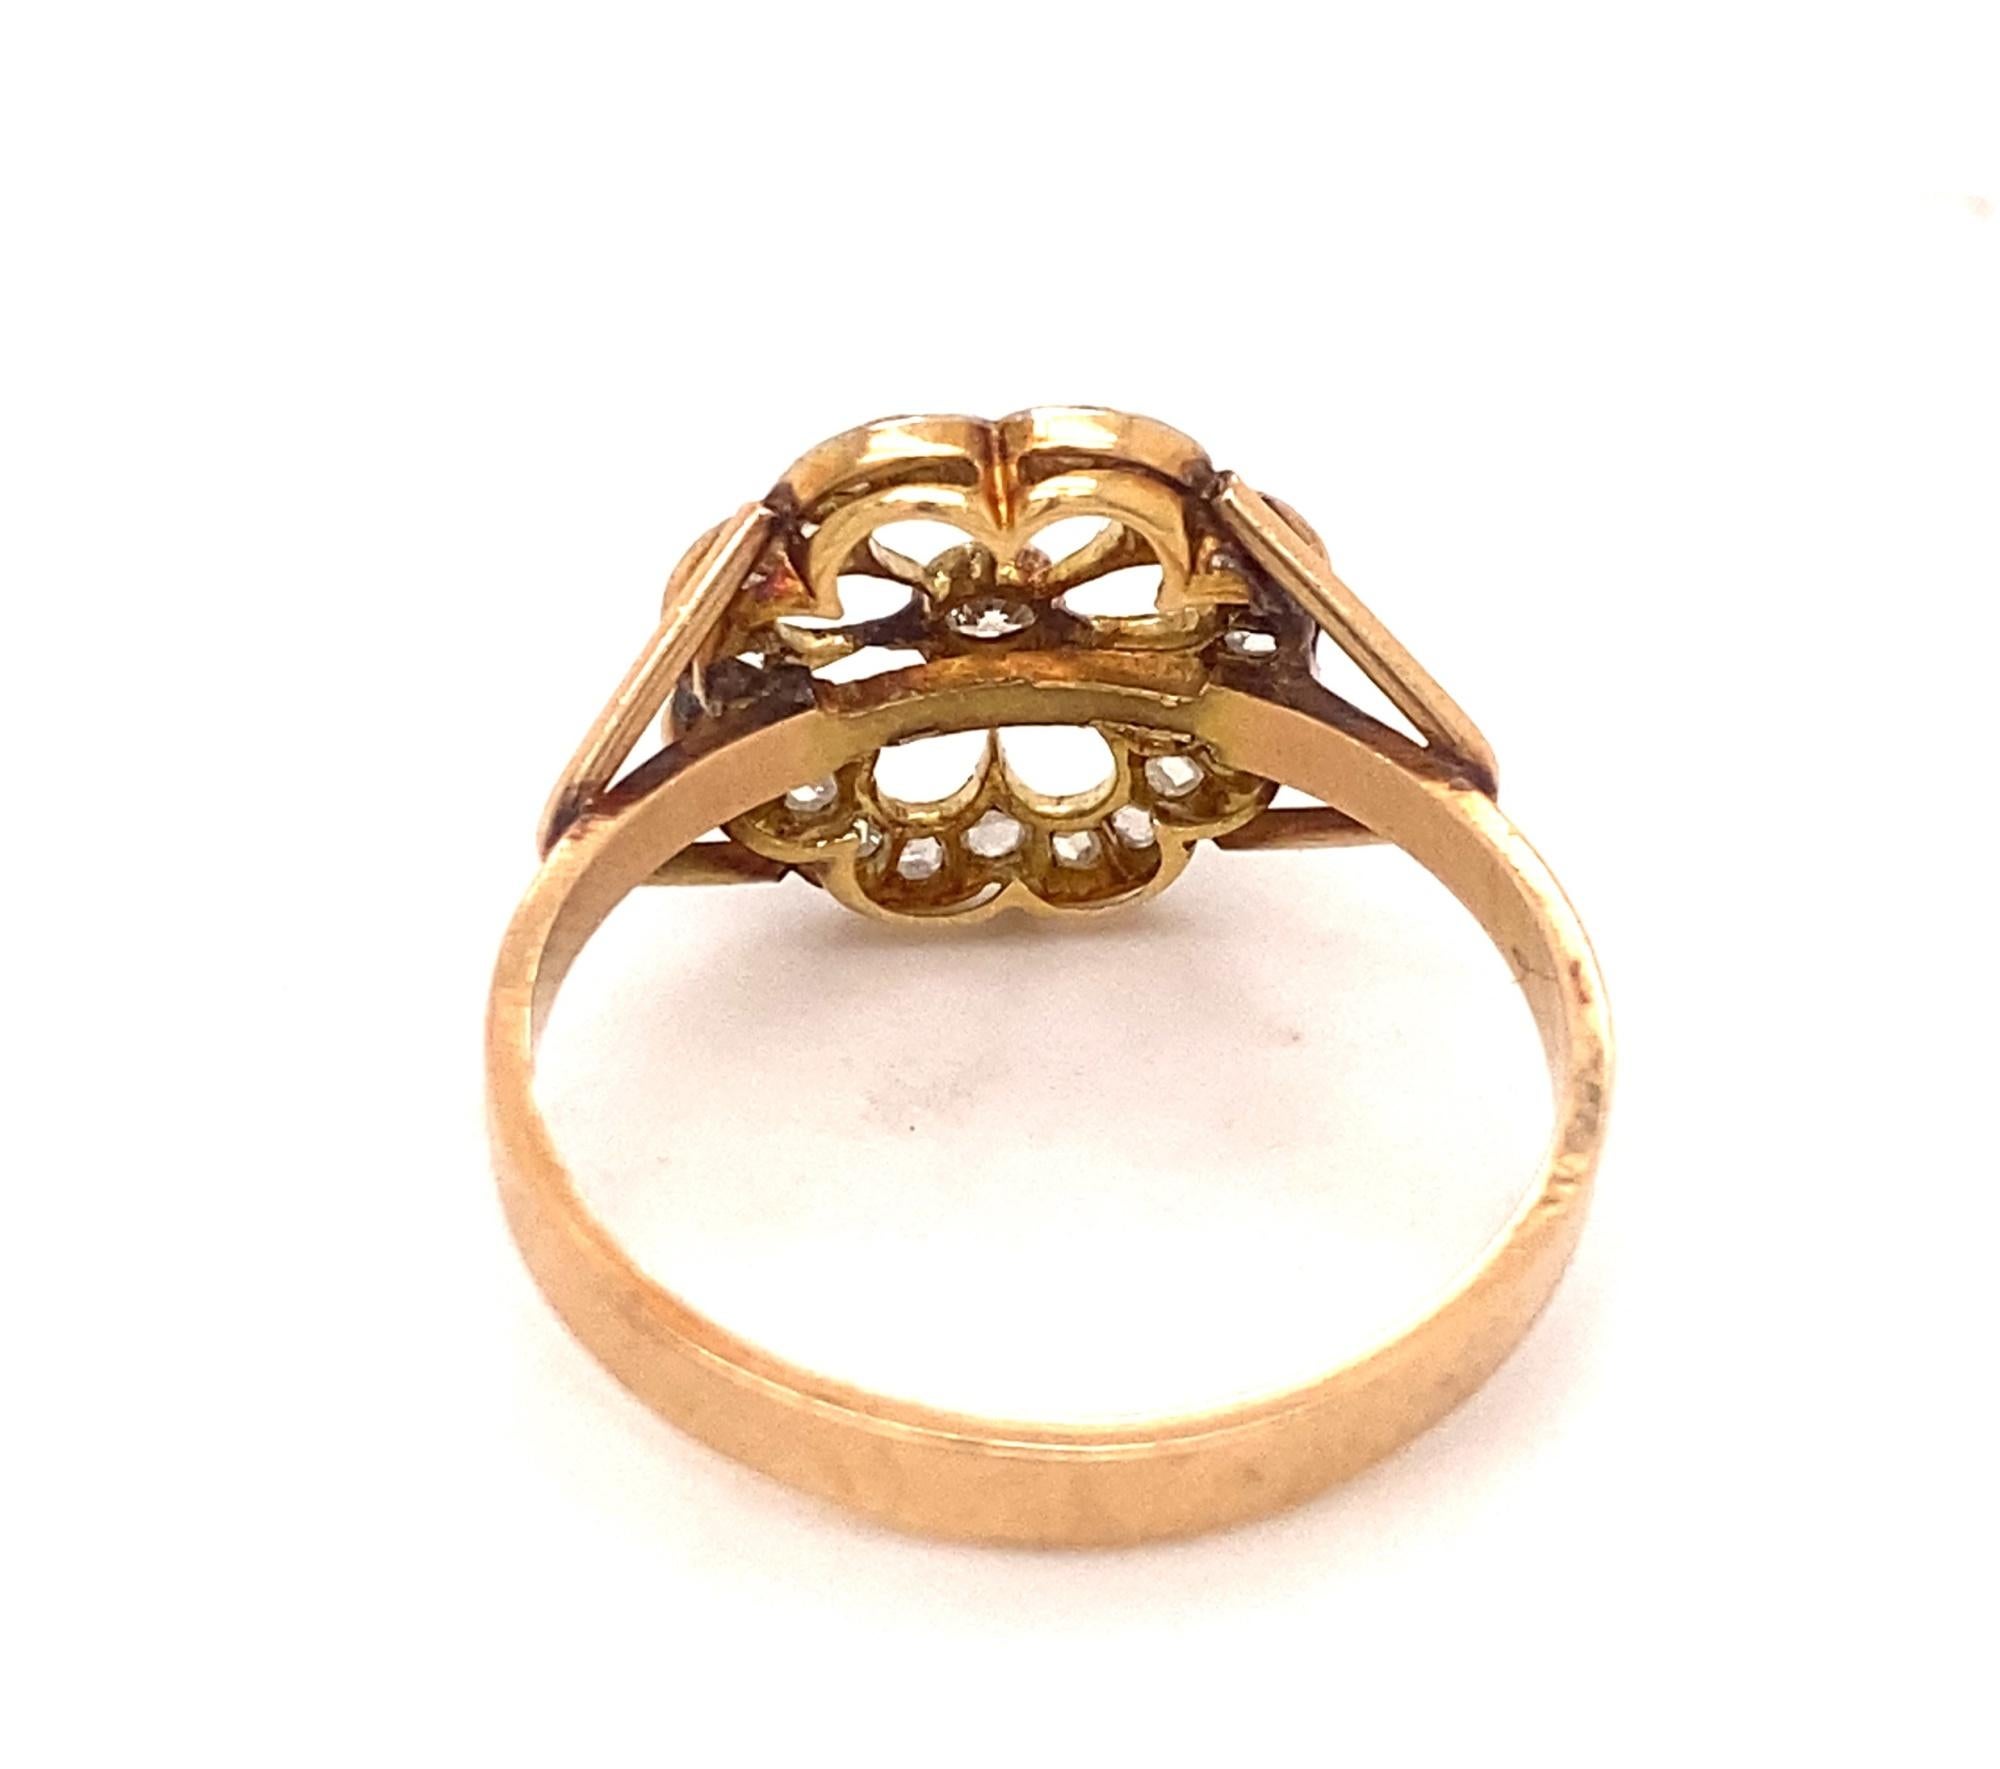 Edwardian Filigree Diamond Platinum 18K Yellow Gold Ring In Excellent Condition For Sale In Woodland Hills, CA